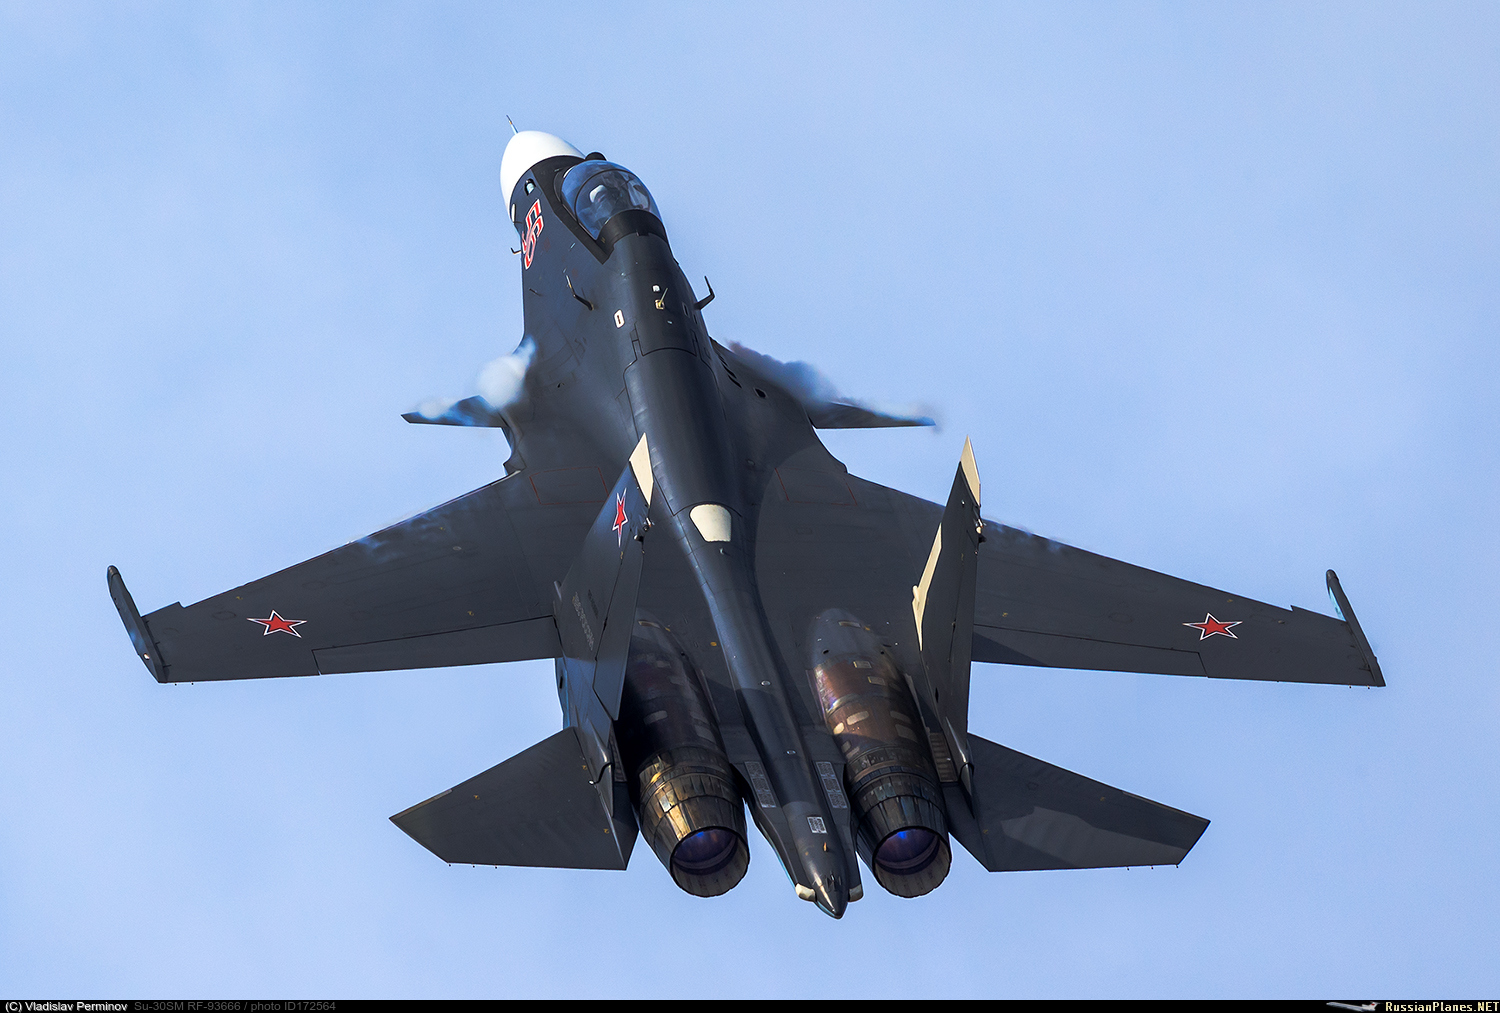 http://russianplanes.net/images/to173000/172564.jpg